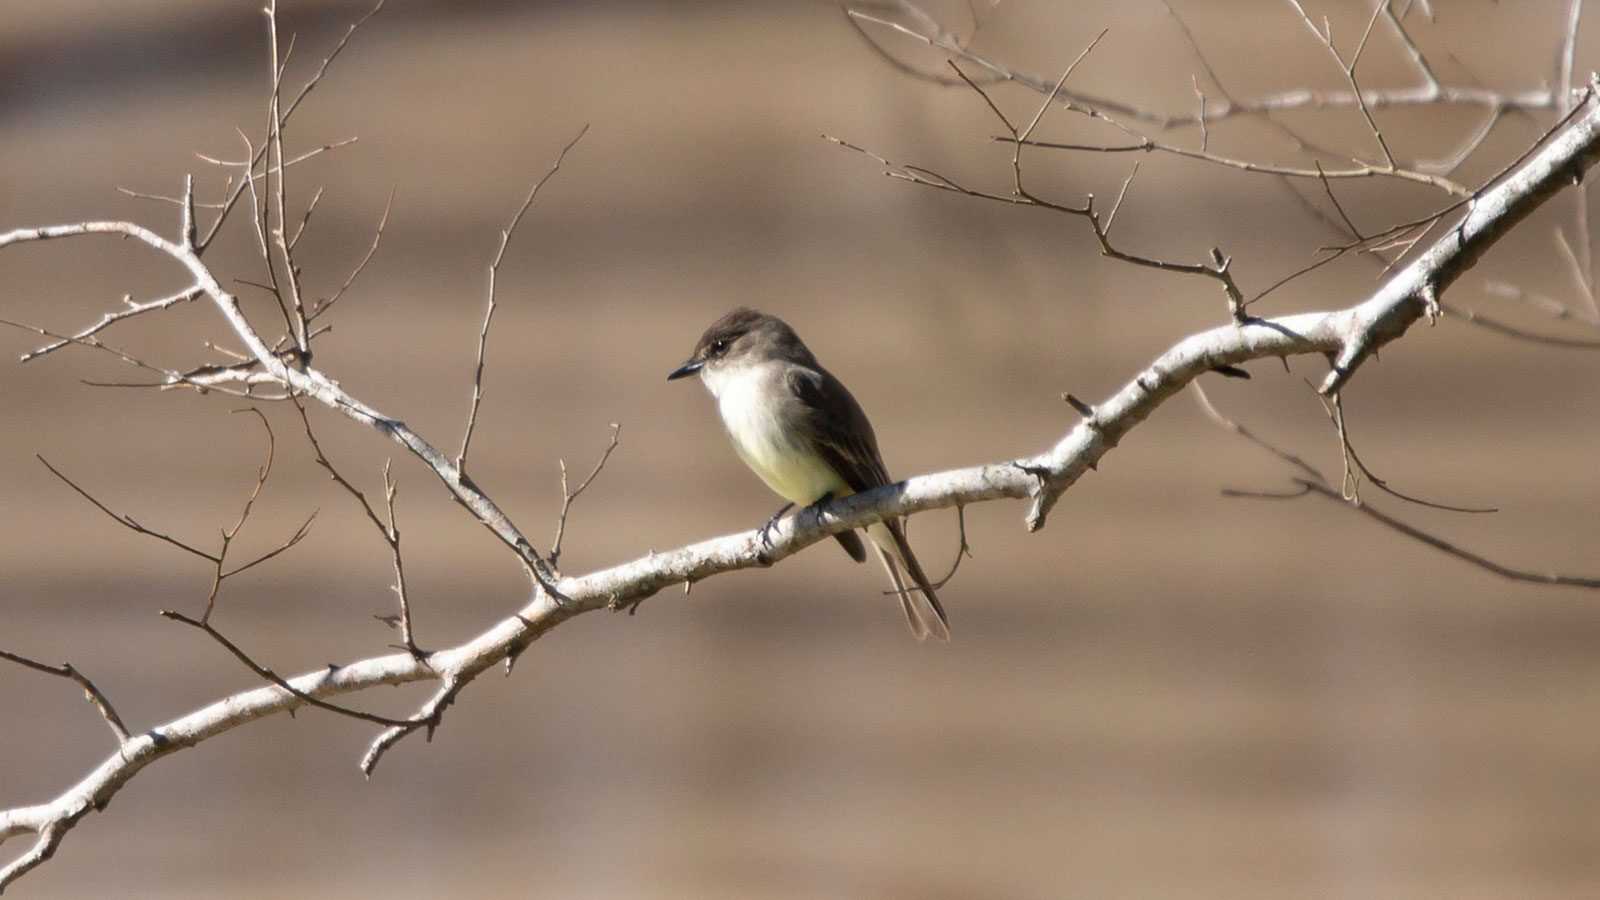 Eastern phoebe looking around from its perch above water